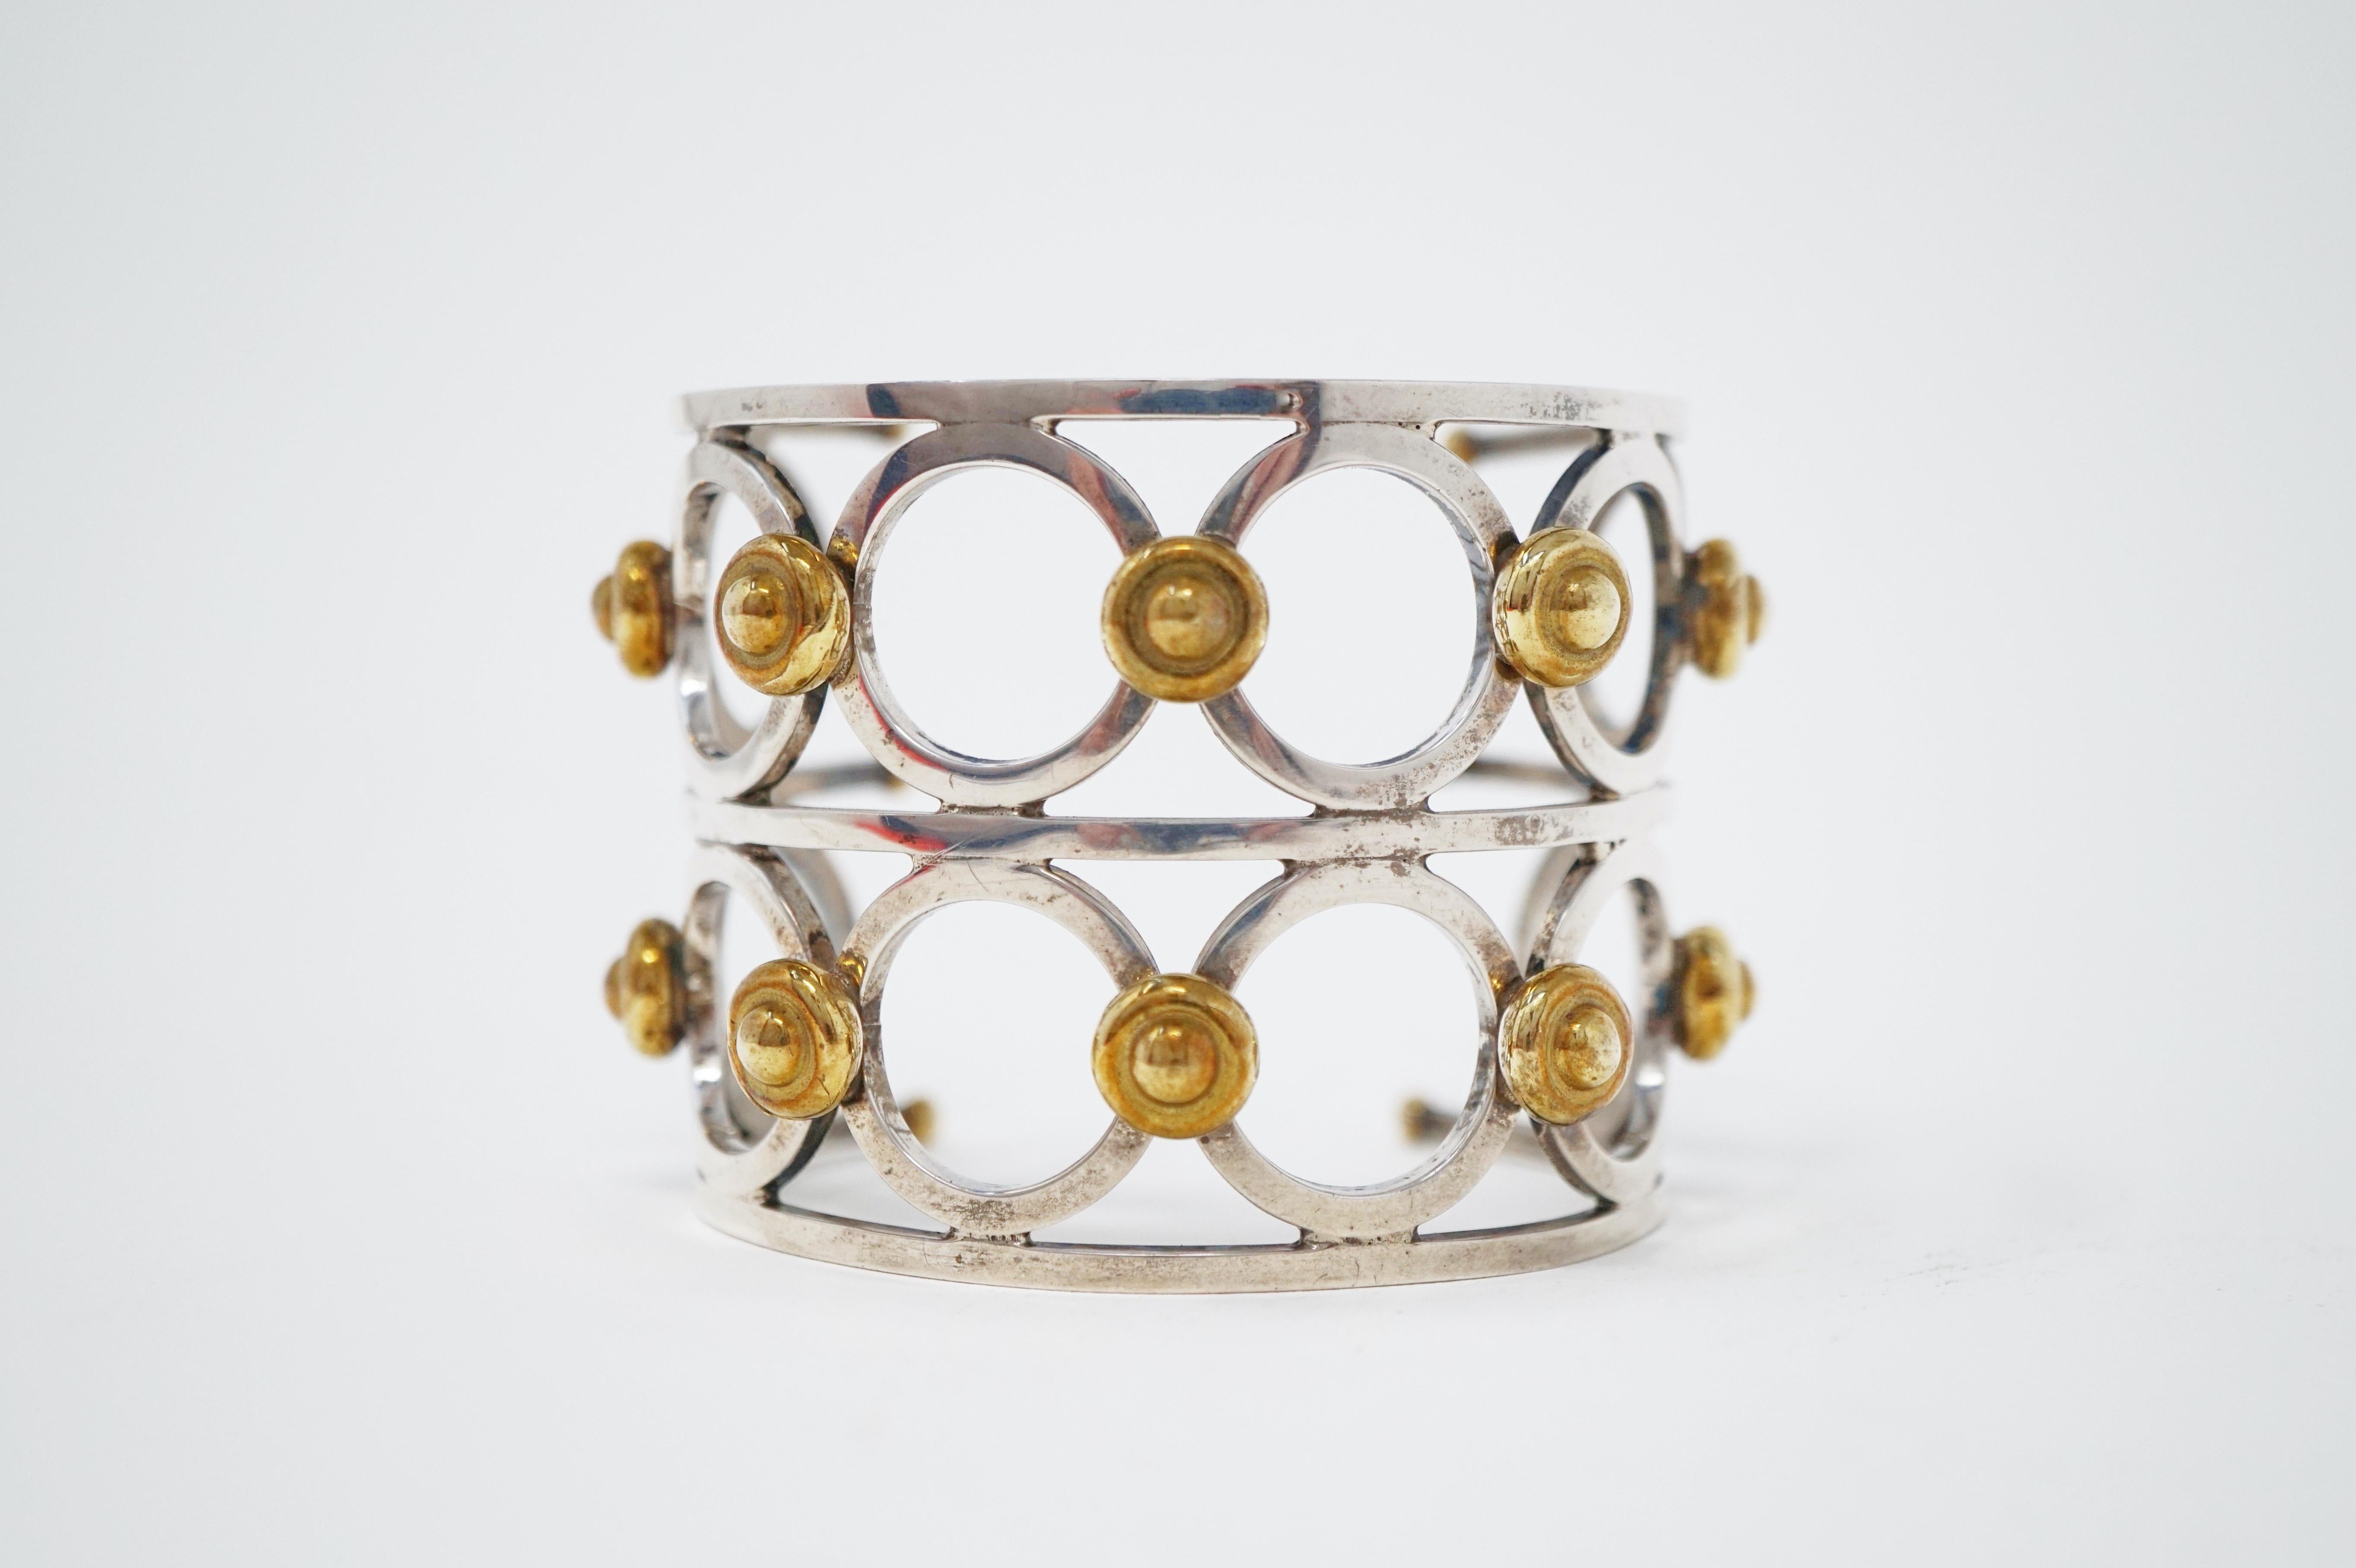 Make a bold statement with this chic steel modernist cuff bracelet with gold-plated details, circa 1970s.  Shiny, polished steel hardware with just the right amount of patina makes this piece a real stunner!  A timeless addition to your vintage